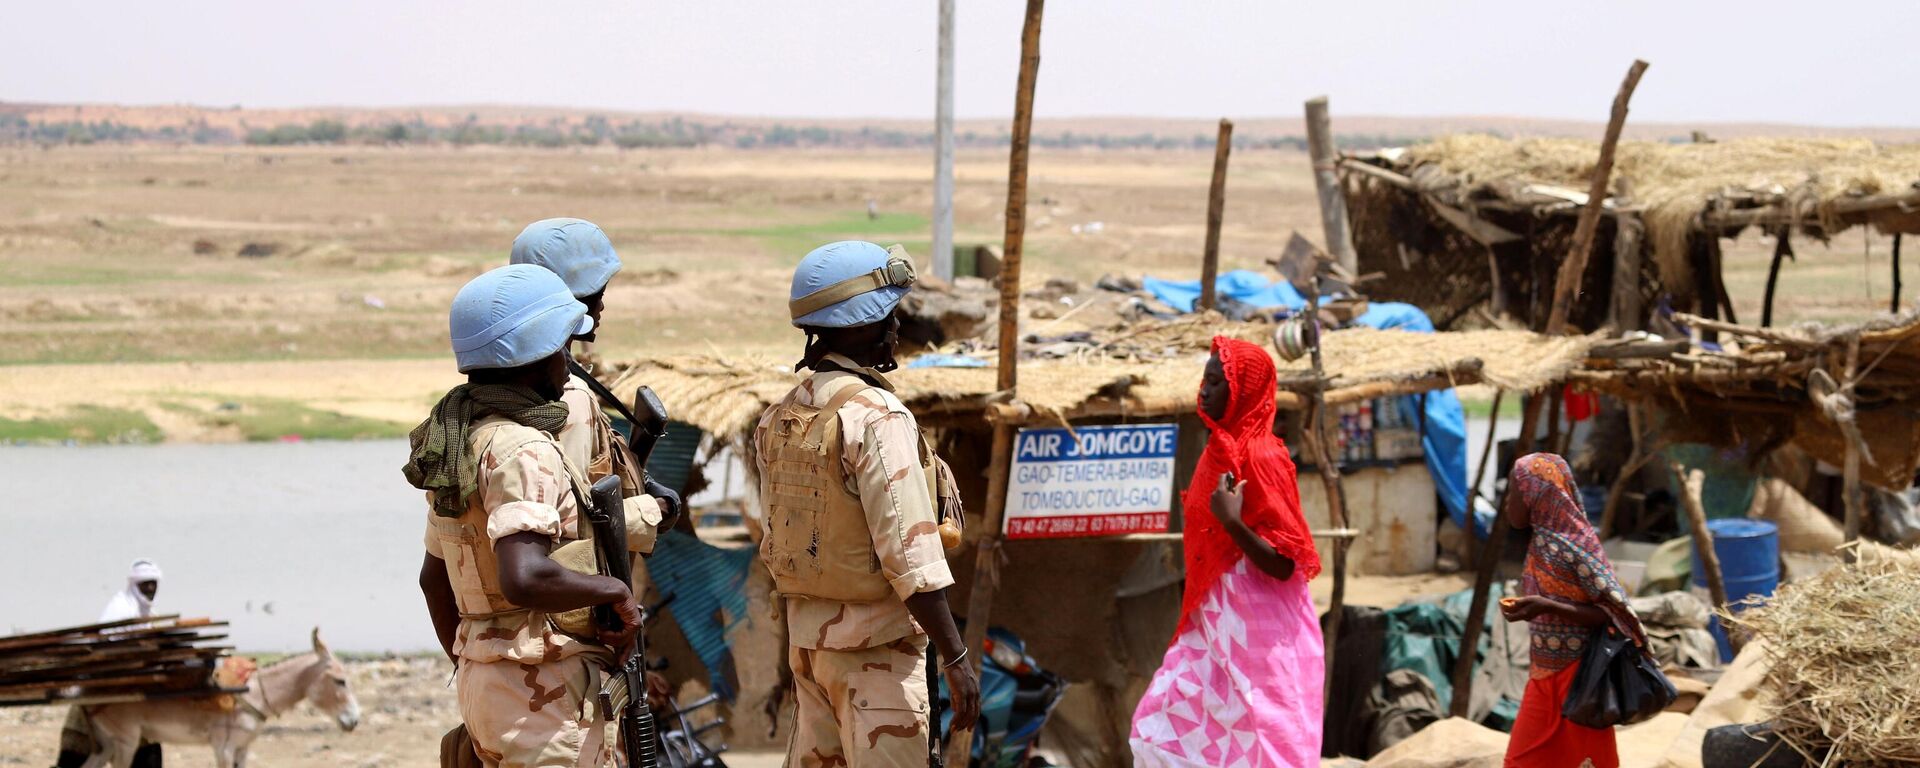 Senegalese soldiers of the UN peacekeeping mission in Mali MINUSMA (United Nations Multidimensional Integrated Stabilisation Mission in Mali) patrol on foot in the streets of Gao, on July 24, 2019 - Sputnik International, 1920, 01.06.2022